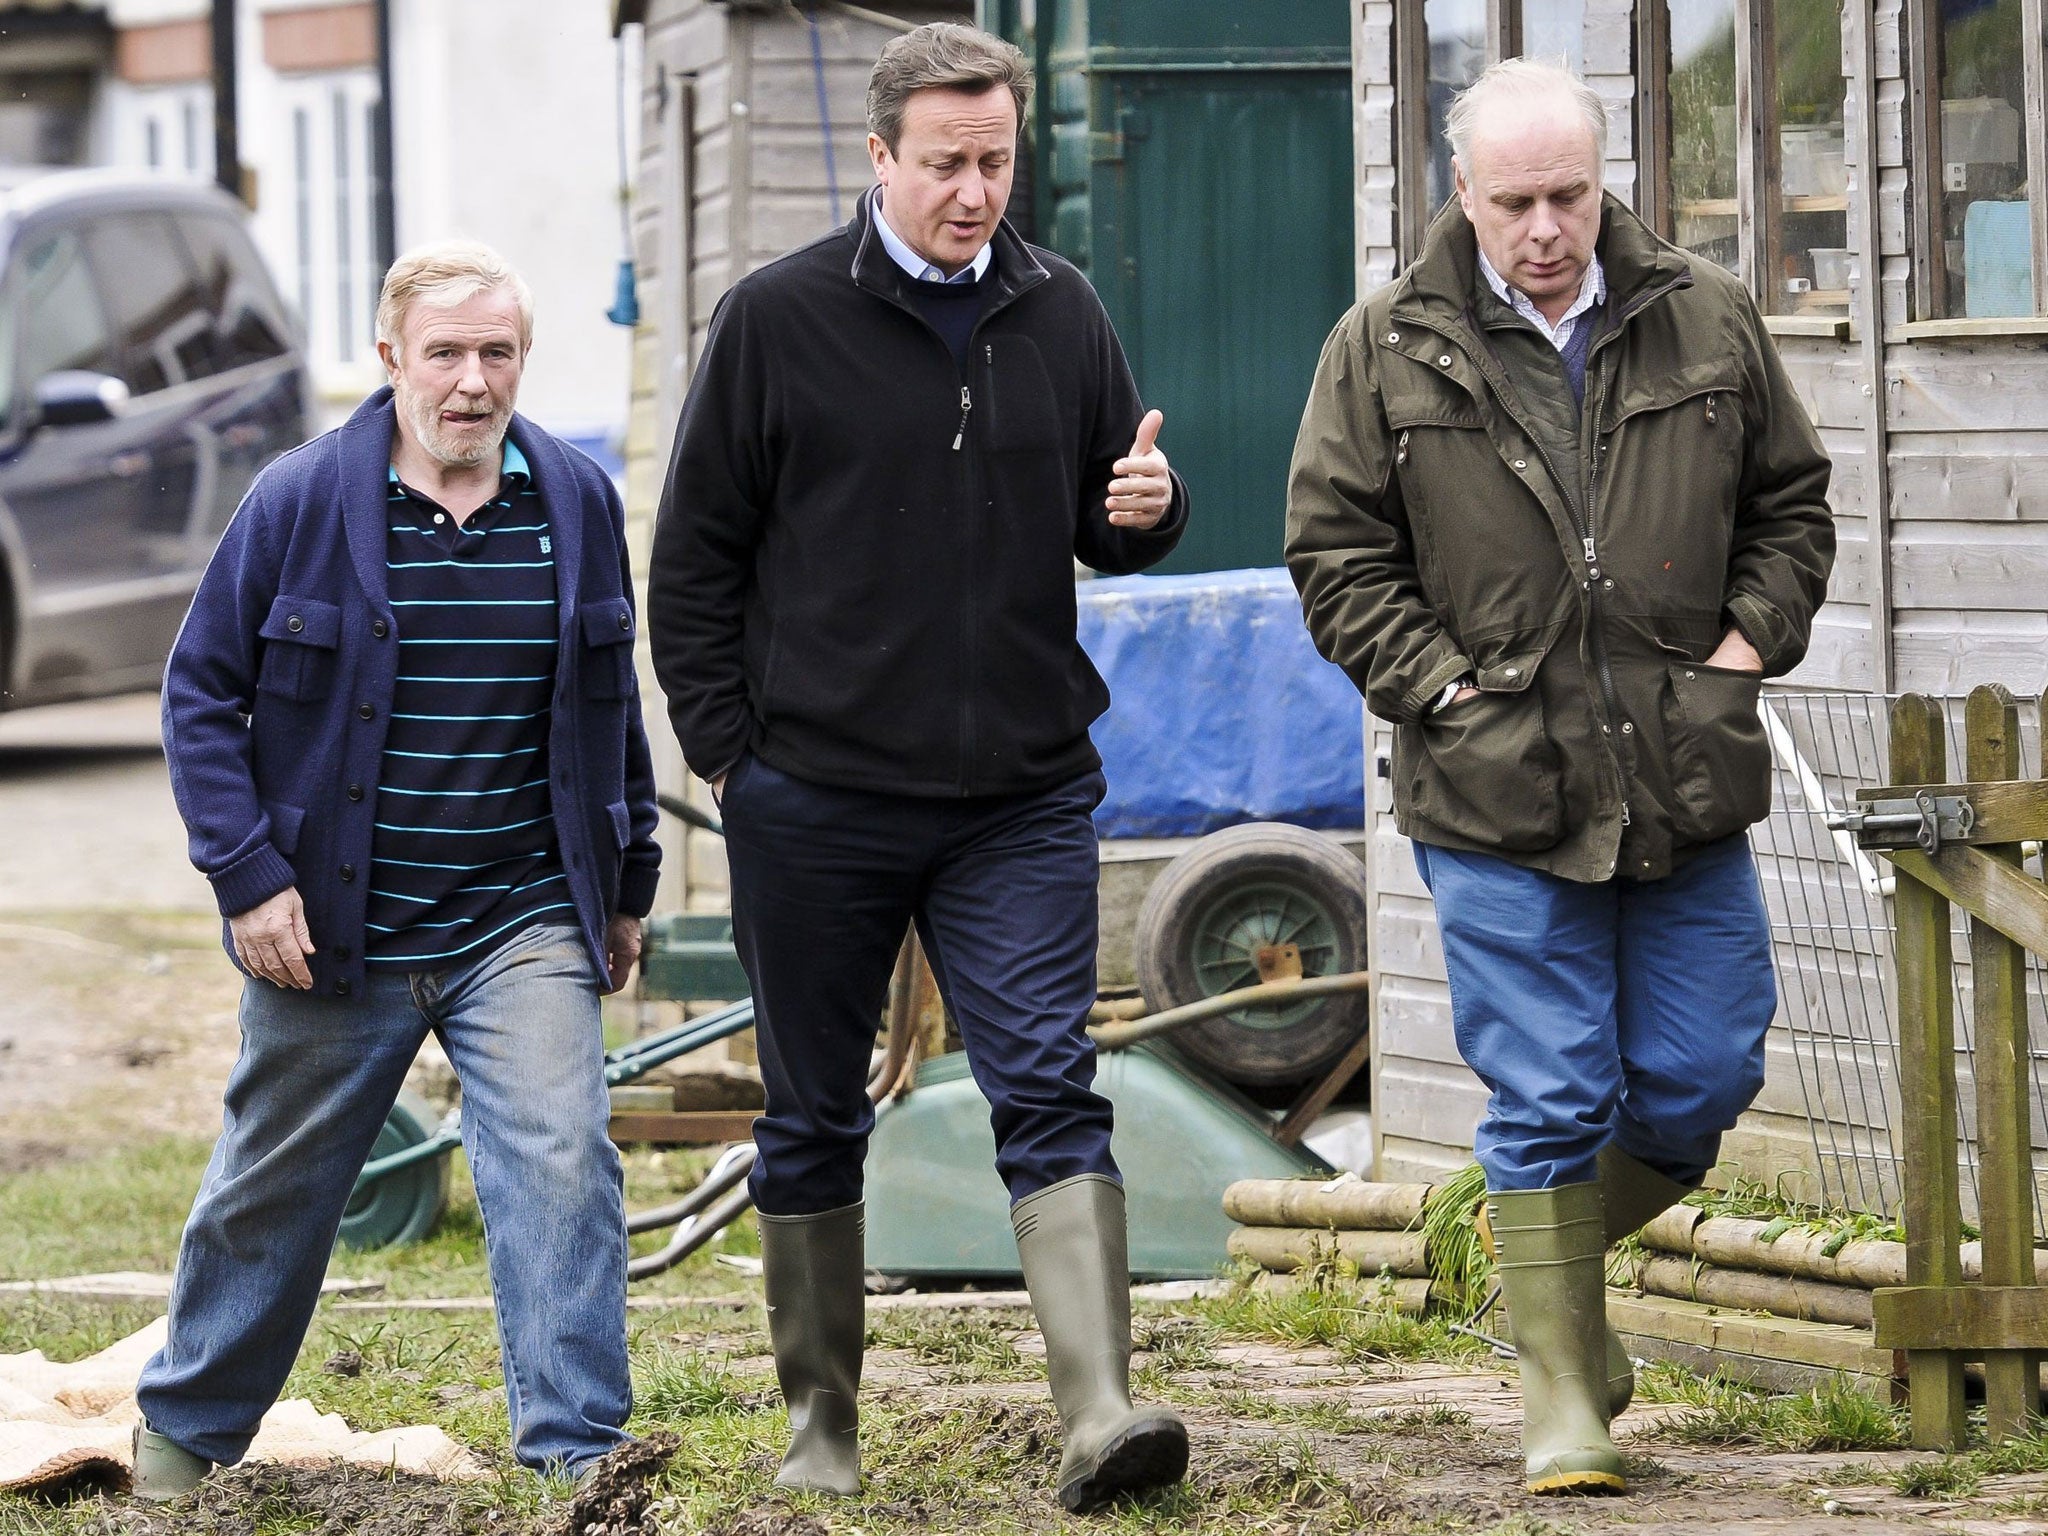 Prime Minister David Cameron visited Pembrokeshire, Wales and the Somerset Levels in England